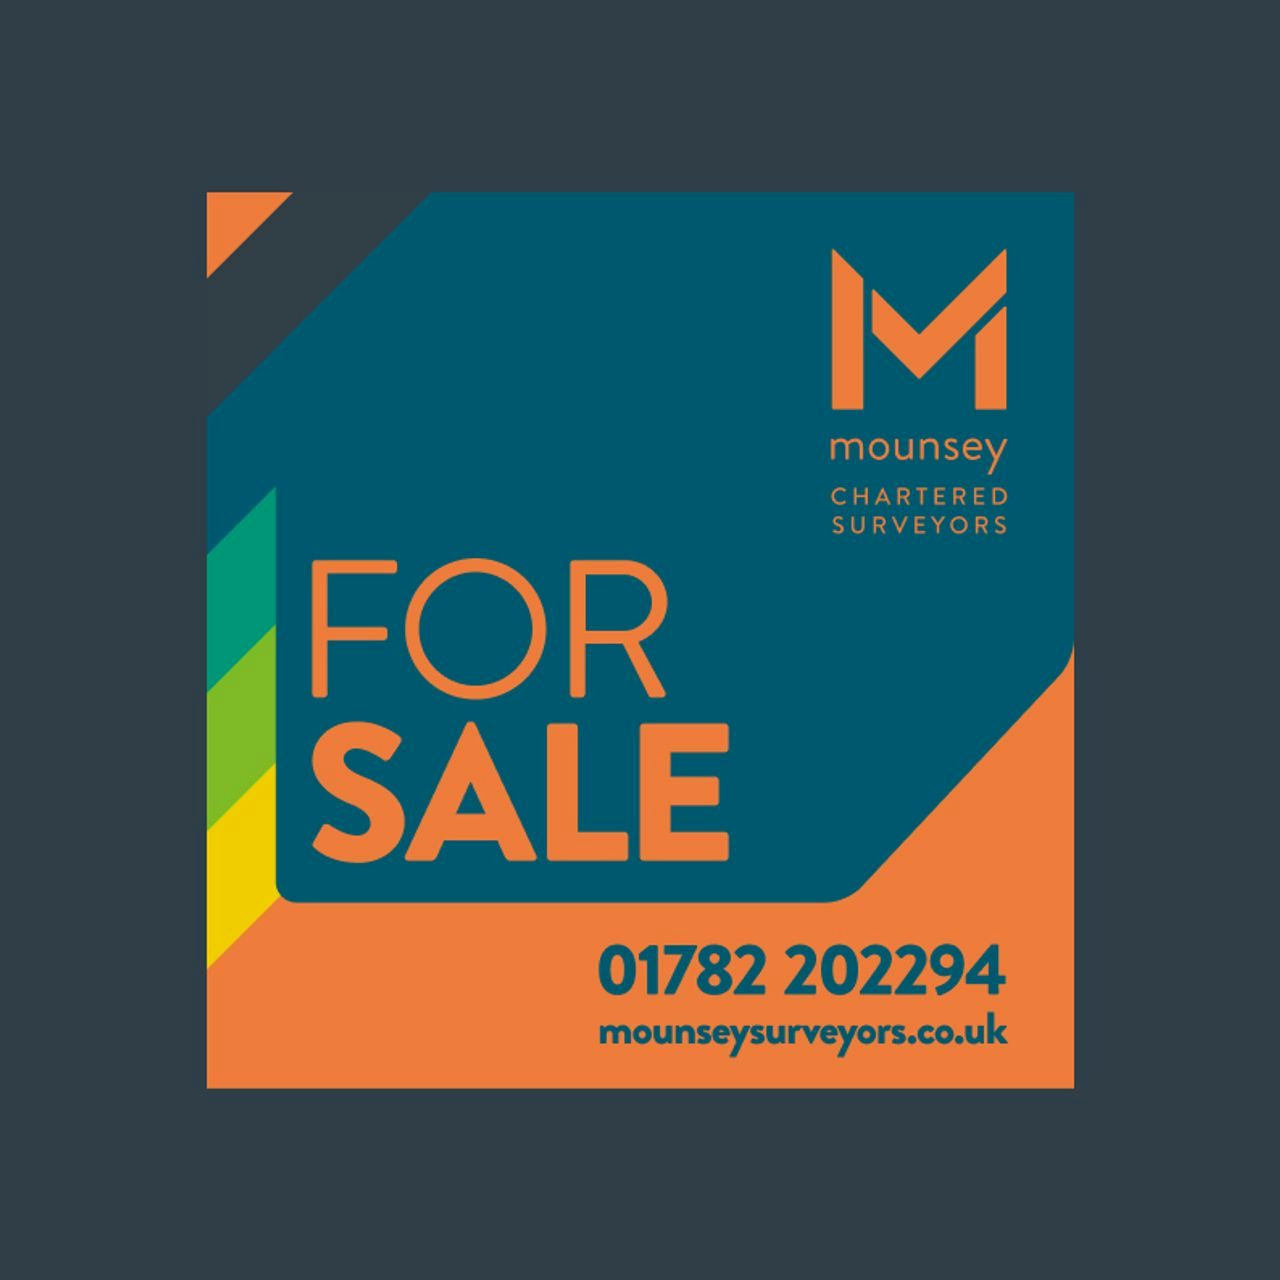 Dark navy 'For Sale' sign with orange and teal accents, featuring the Mounsey Chartered Surveyors logo, contact number and website.